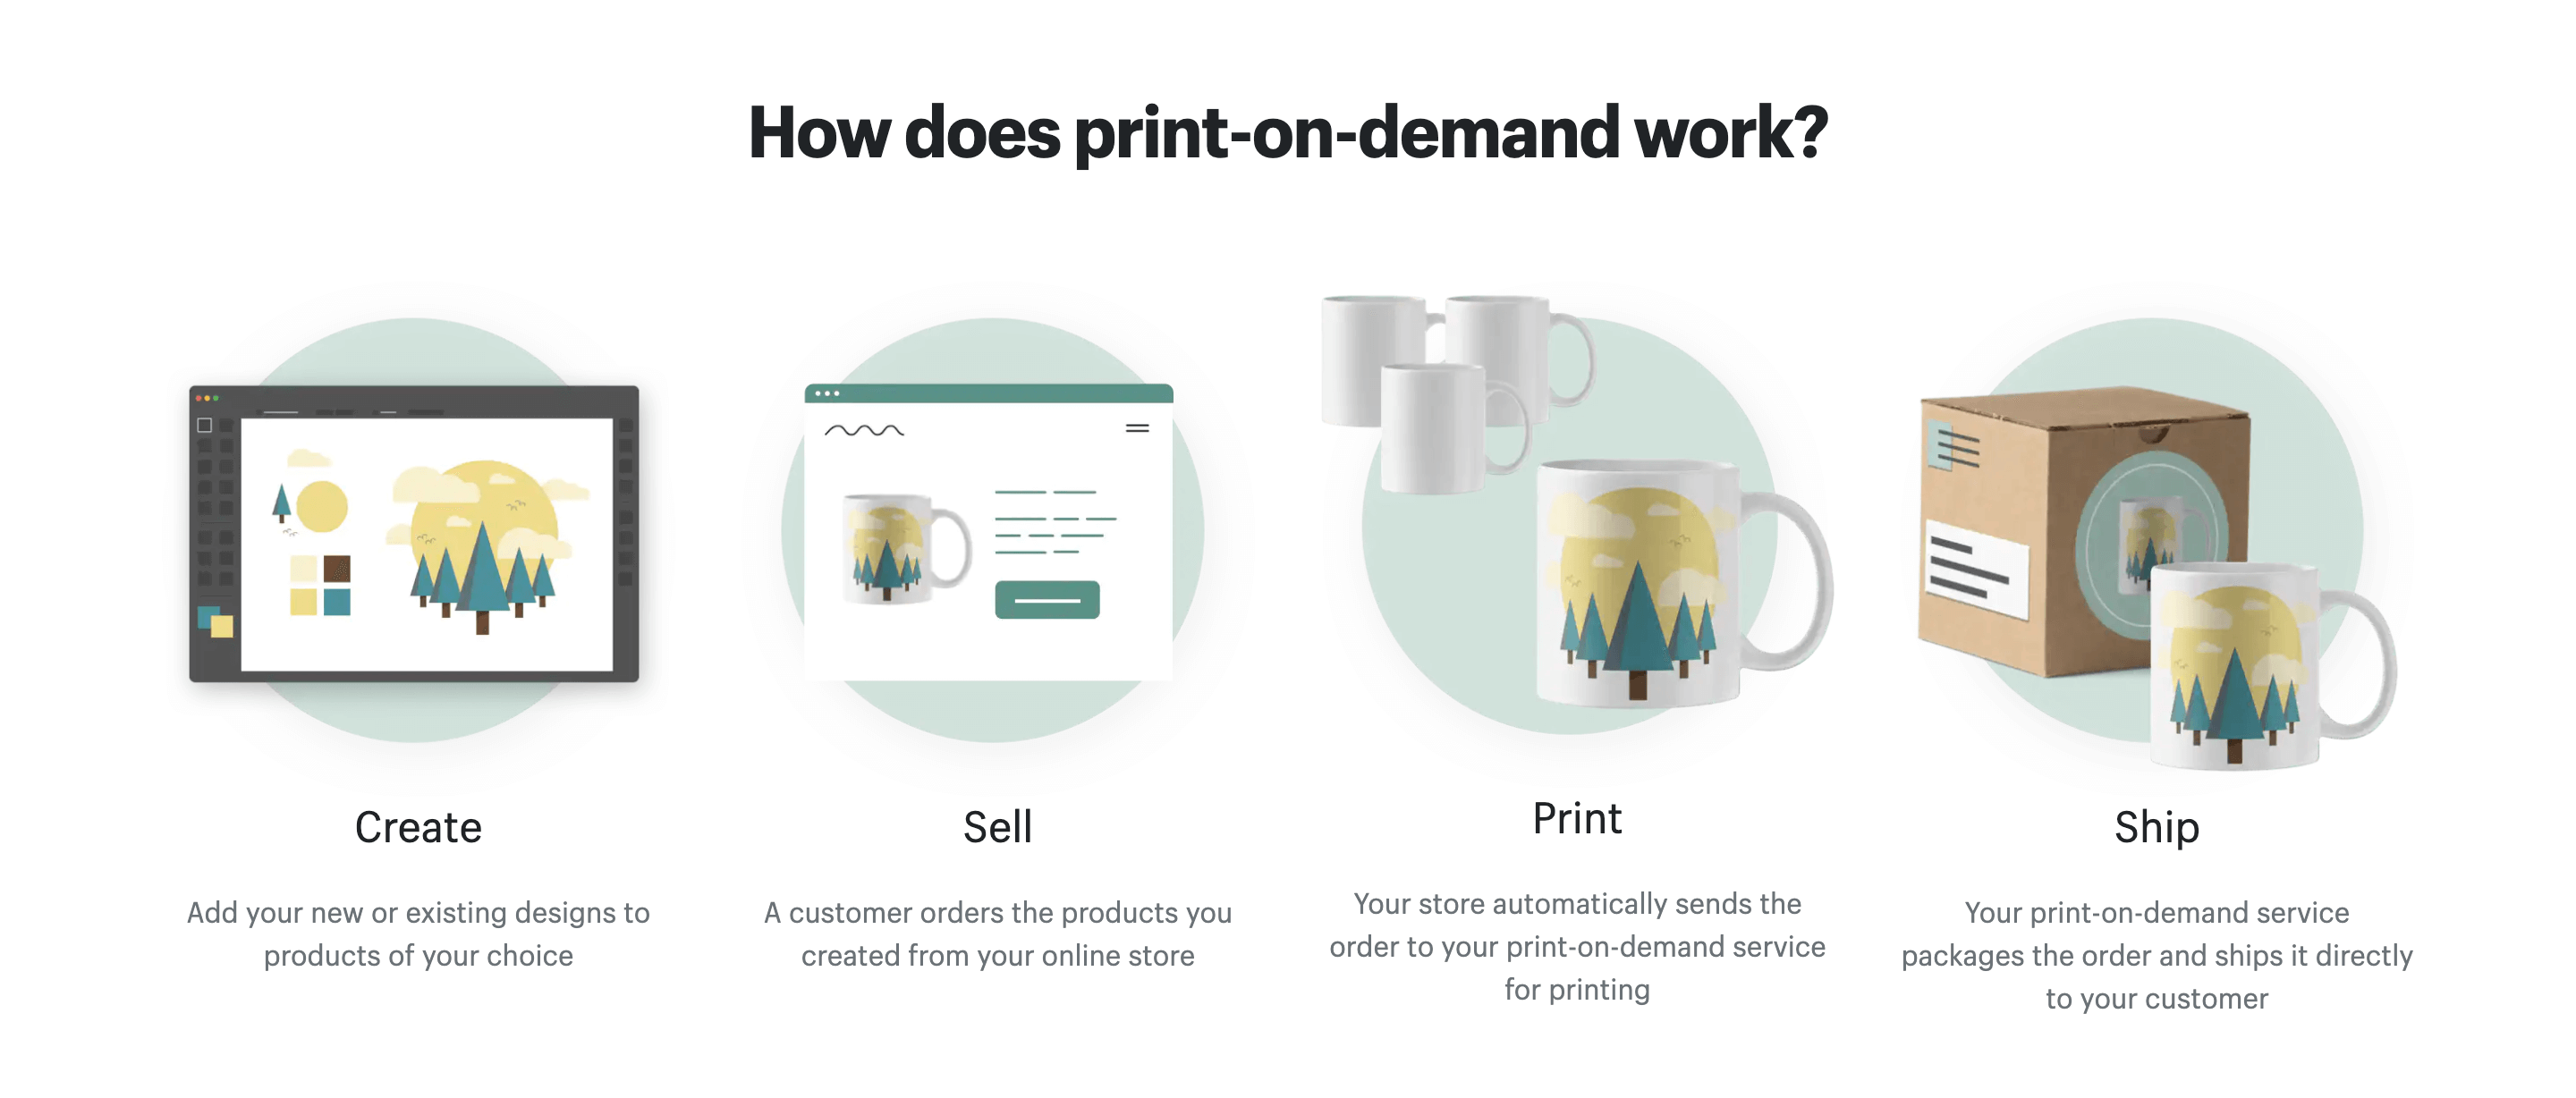 How does print-on-demand work